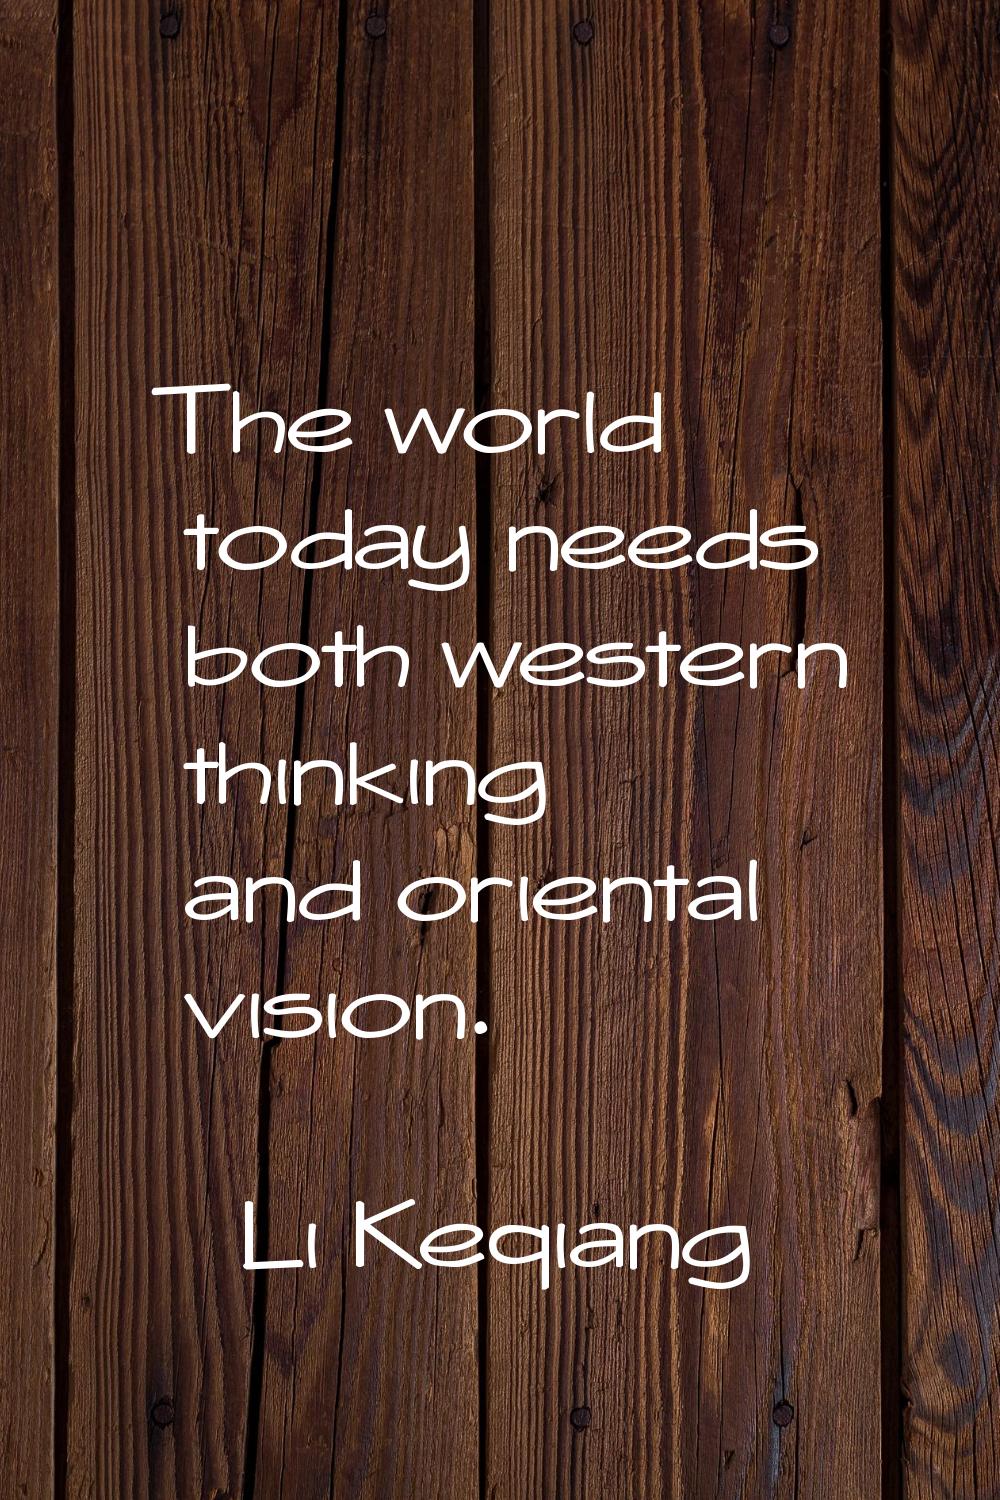 The world today needs both western thinking and oriental vision.